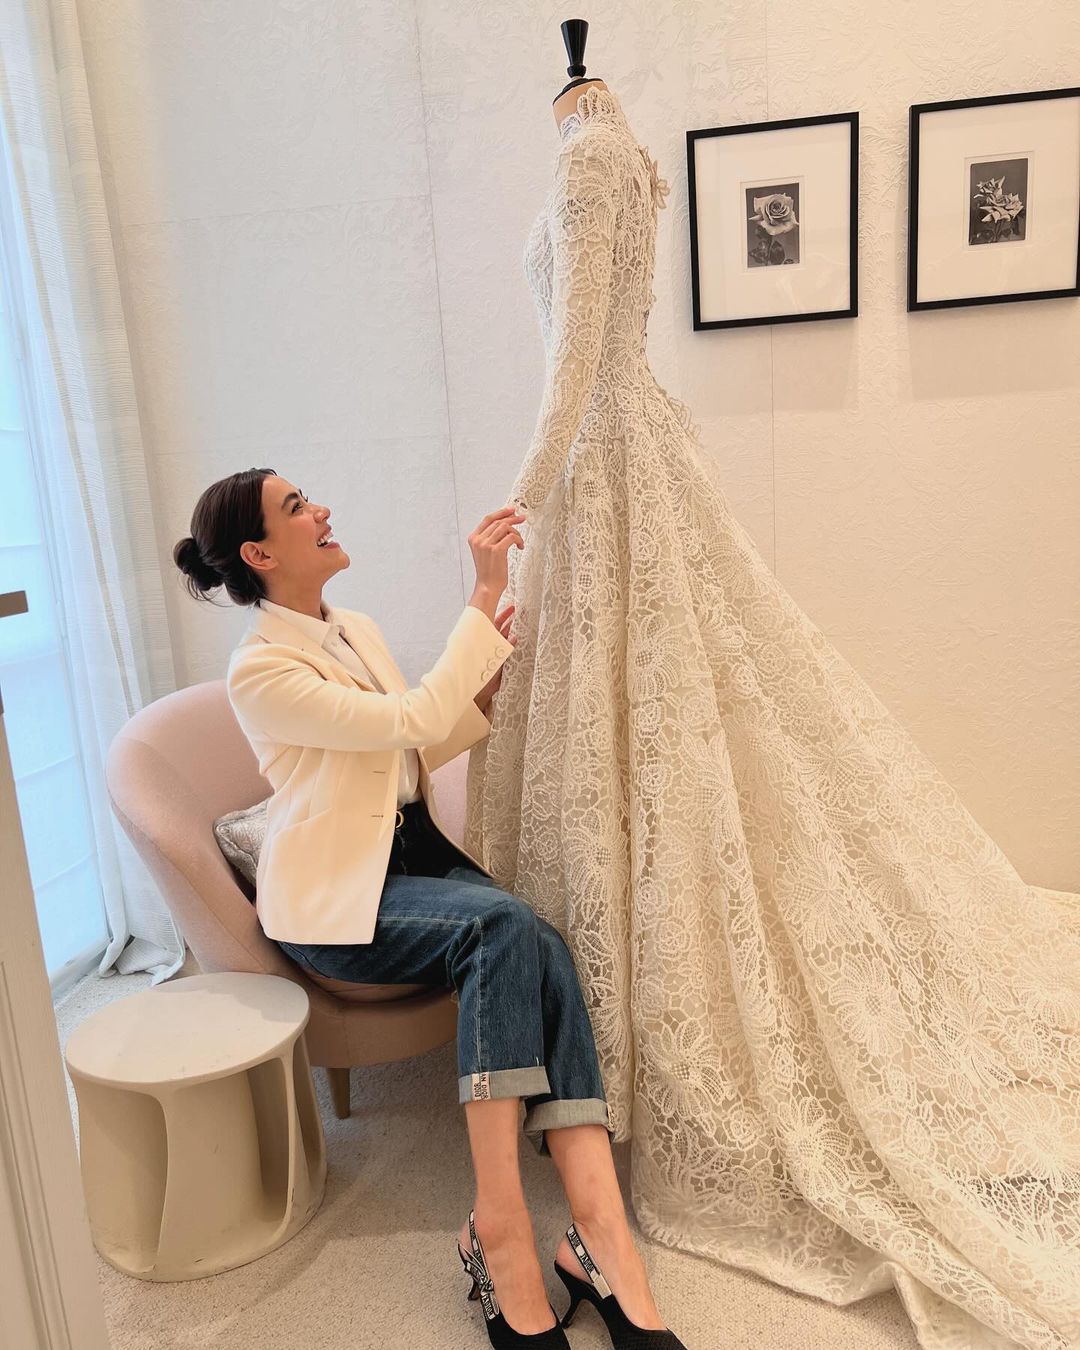 Kimberley Anne Woltemas and her wedding dress.